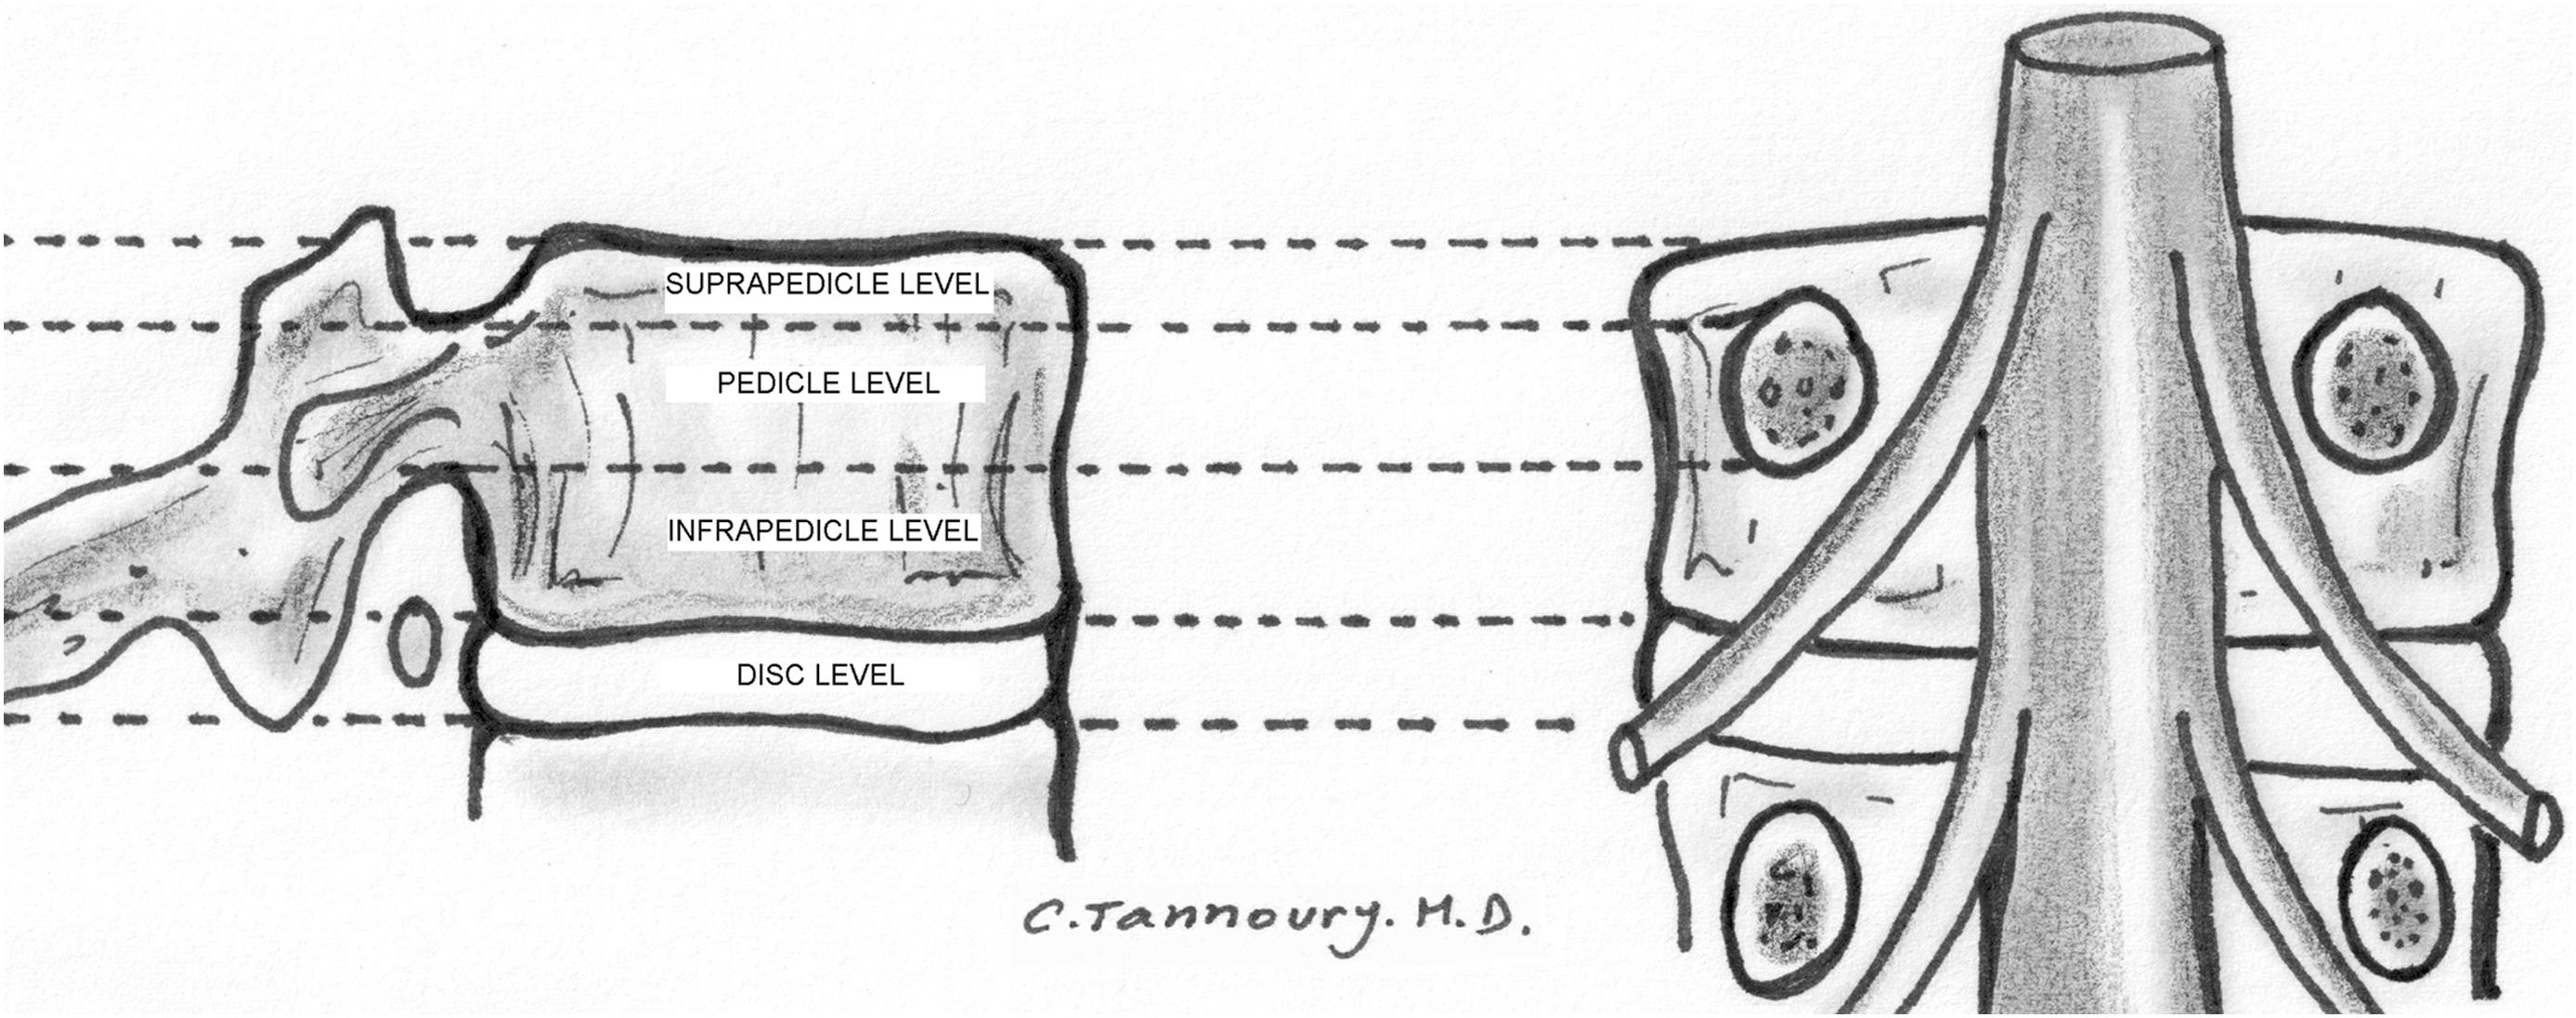 Figure 8.3, Schematic illustration of anatomic levels and zones.